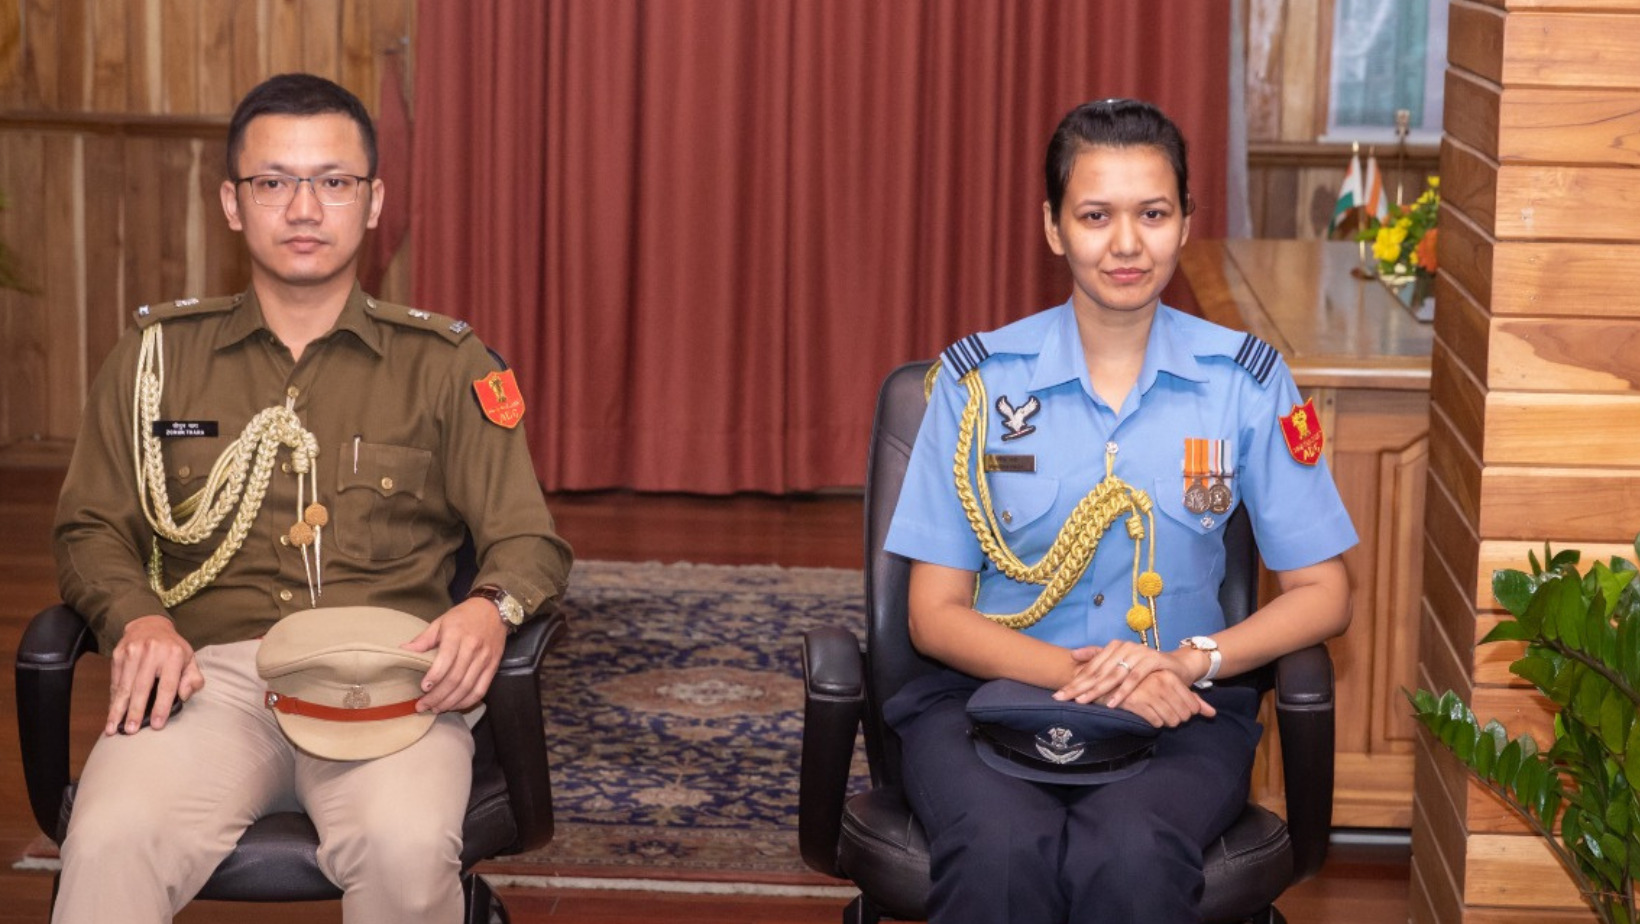 Air Force officer Manisha Padhi appointed as India's first woman Aide De Camp